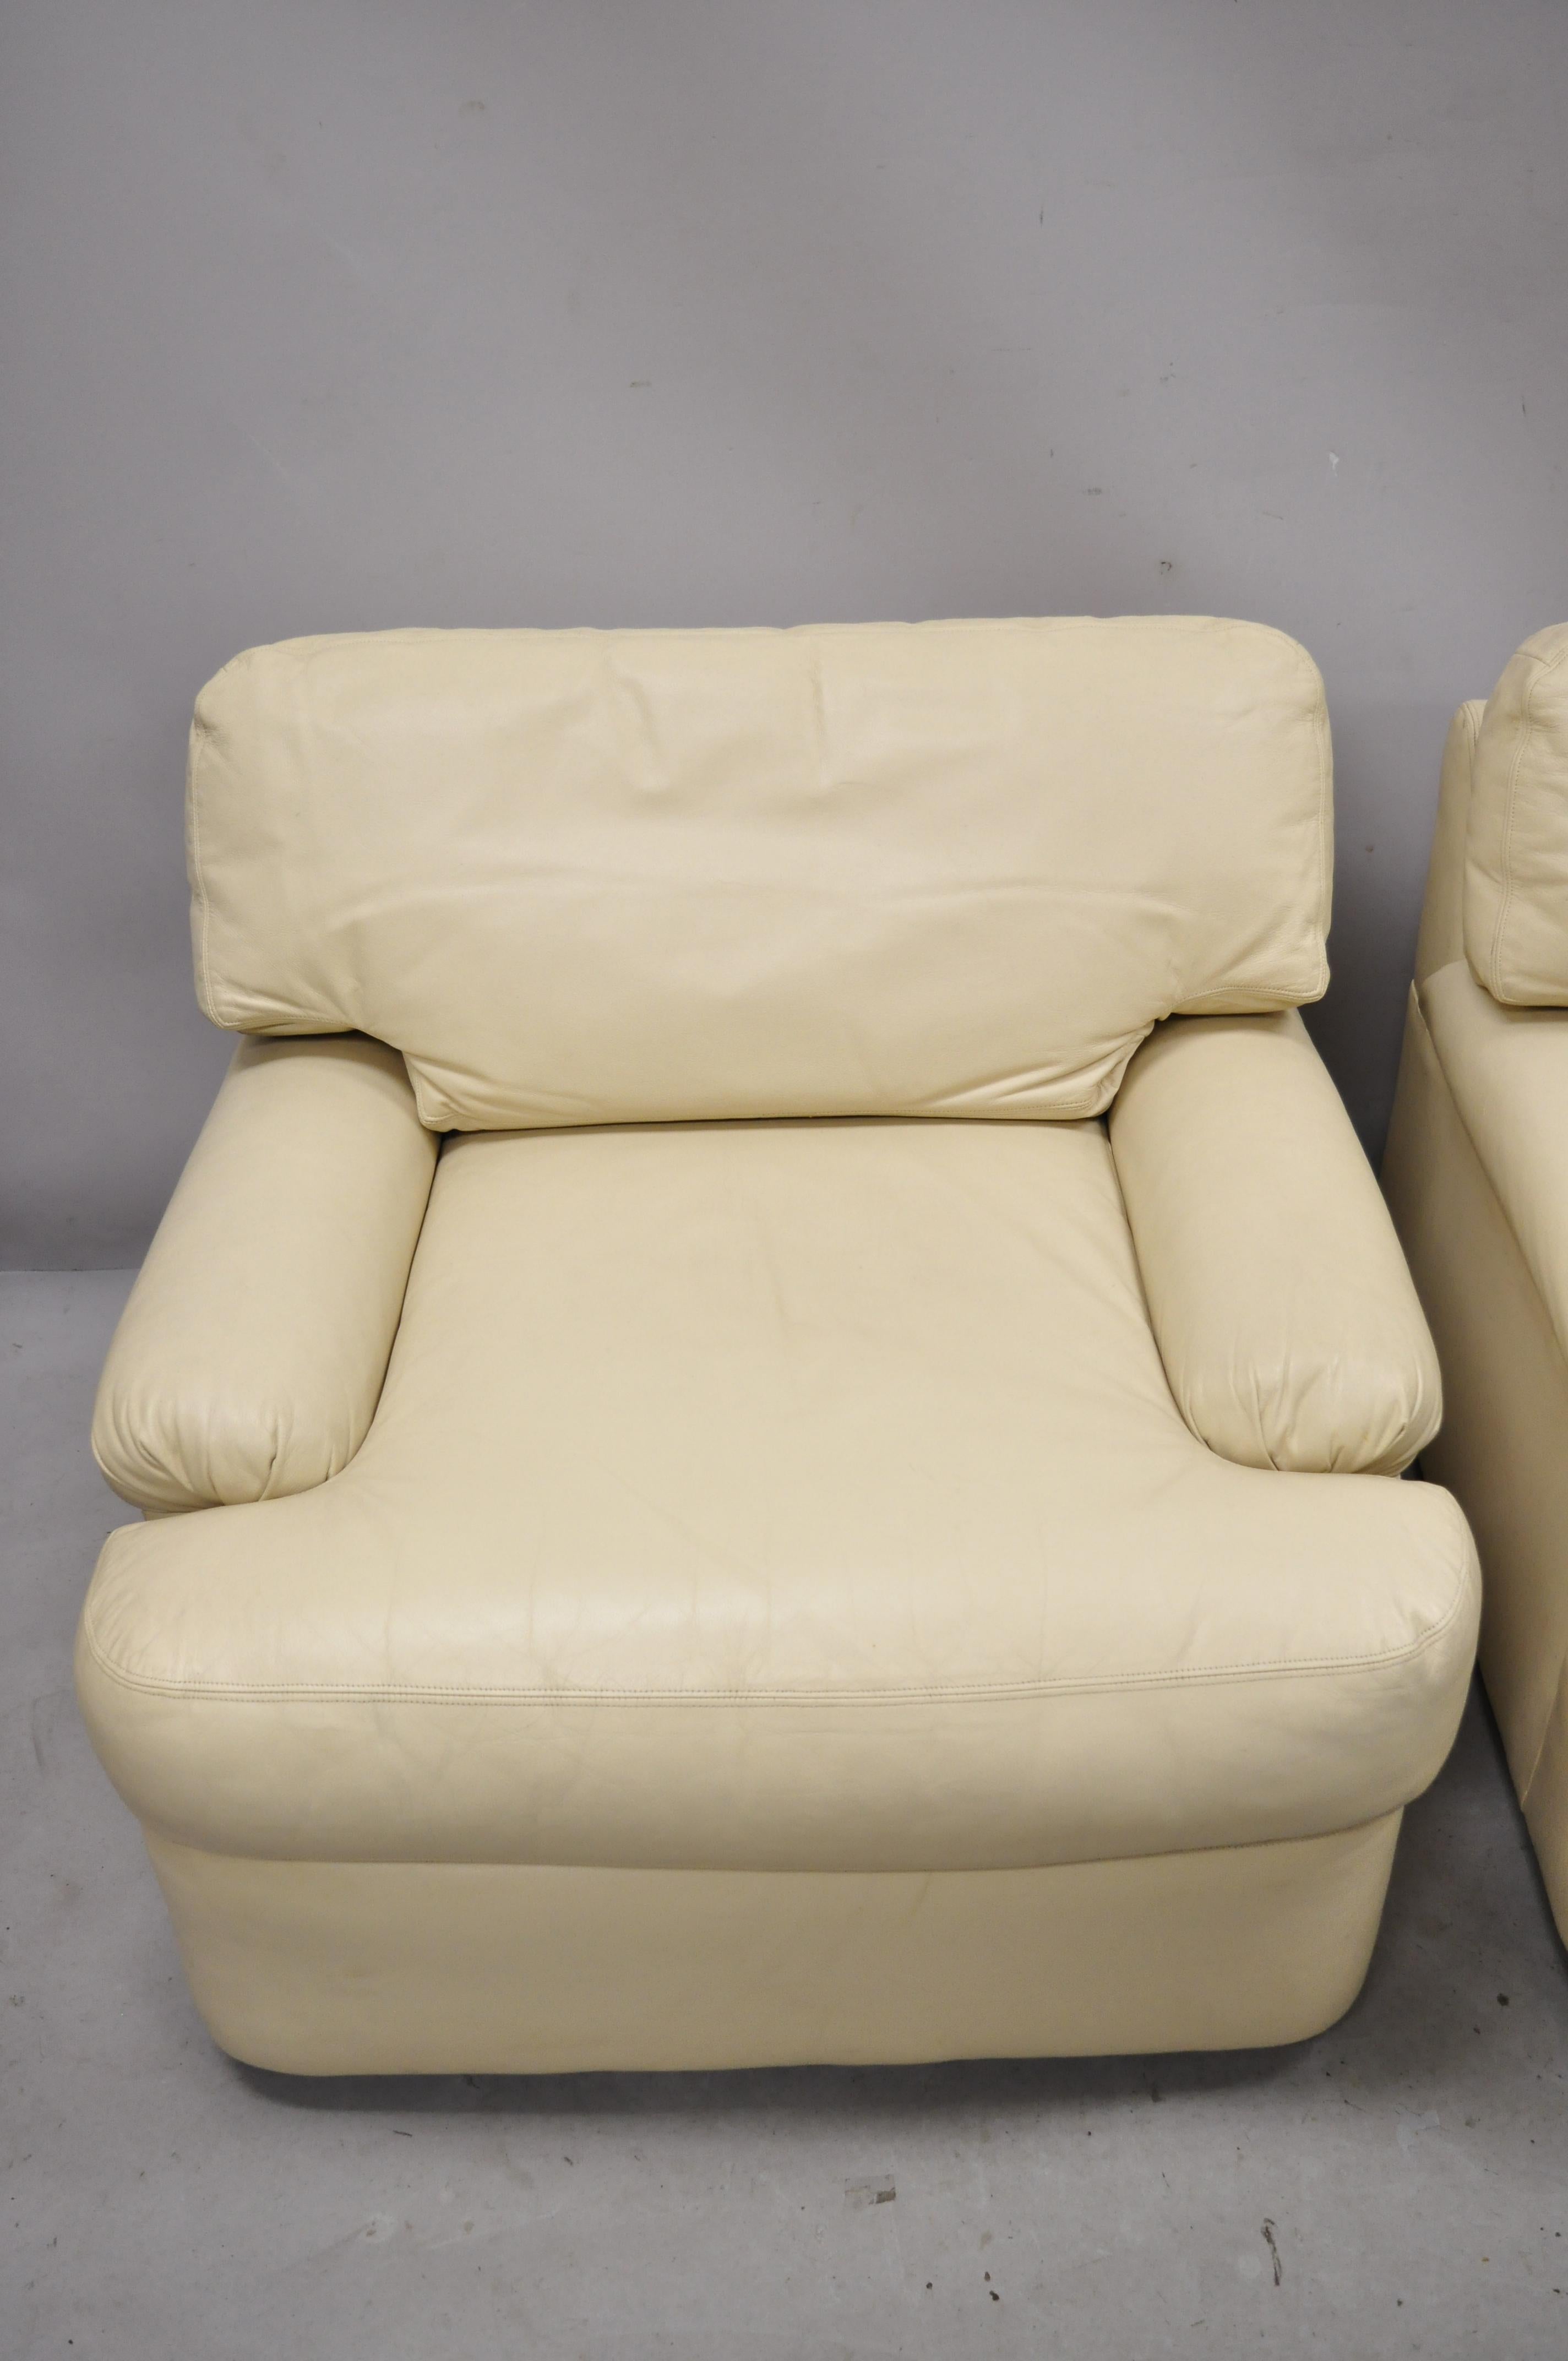 Mid-Century Modern Directional Swivel Beige Leather Club Lounge Pair Armchairs, style of Baughman For Sale